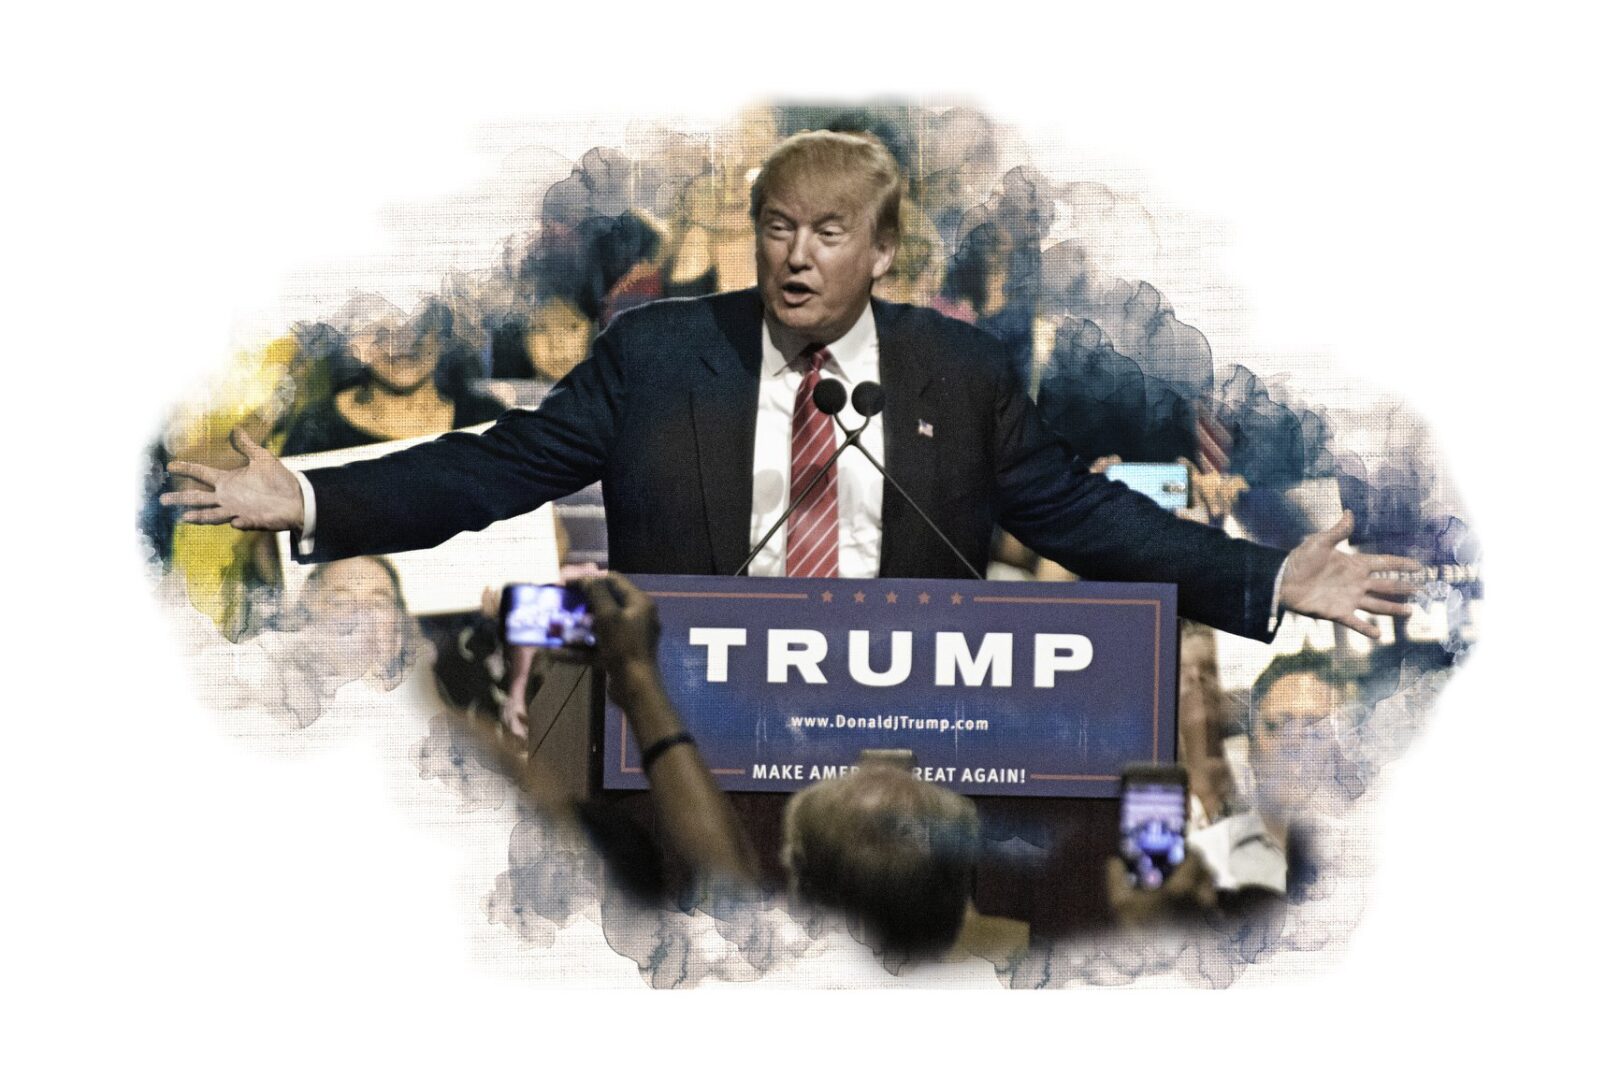 Illustration of Donald Trump at a rally. 